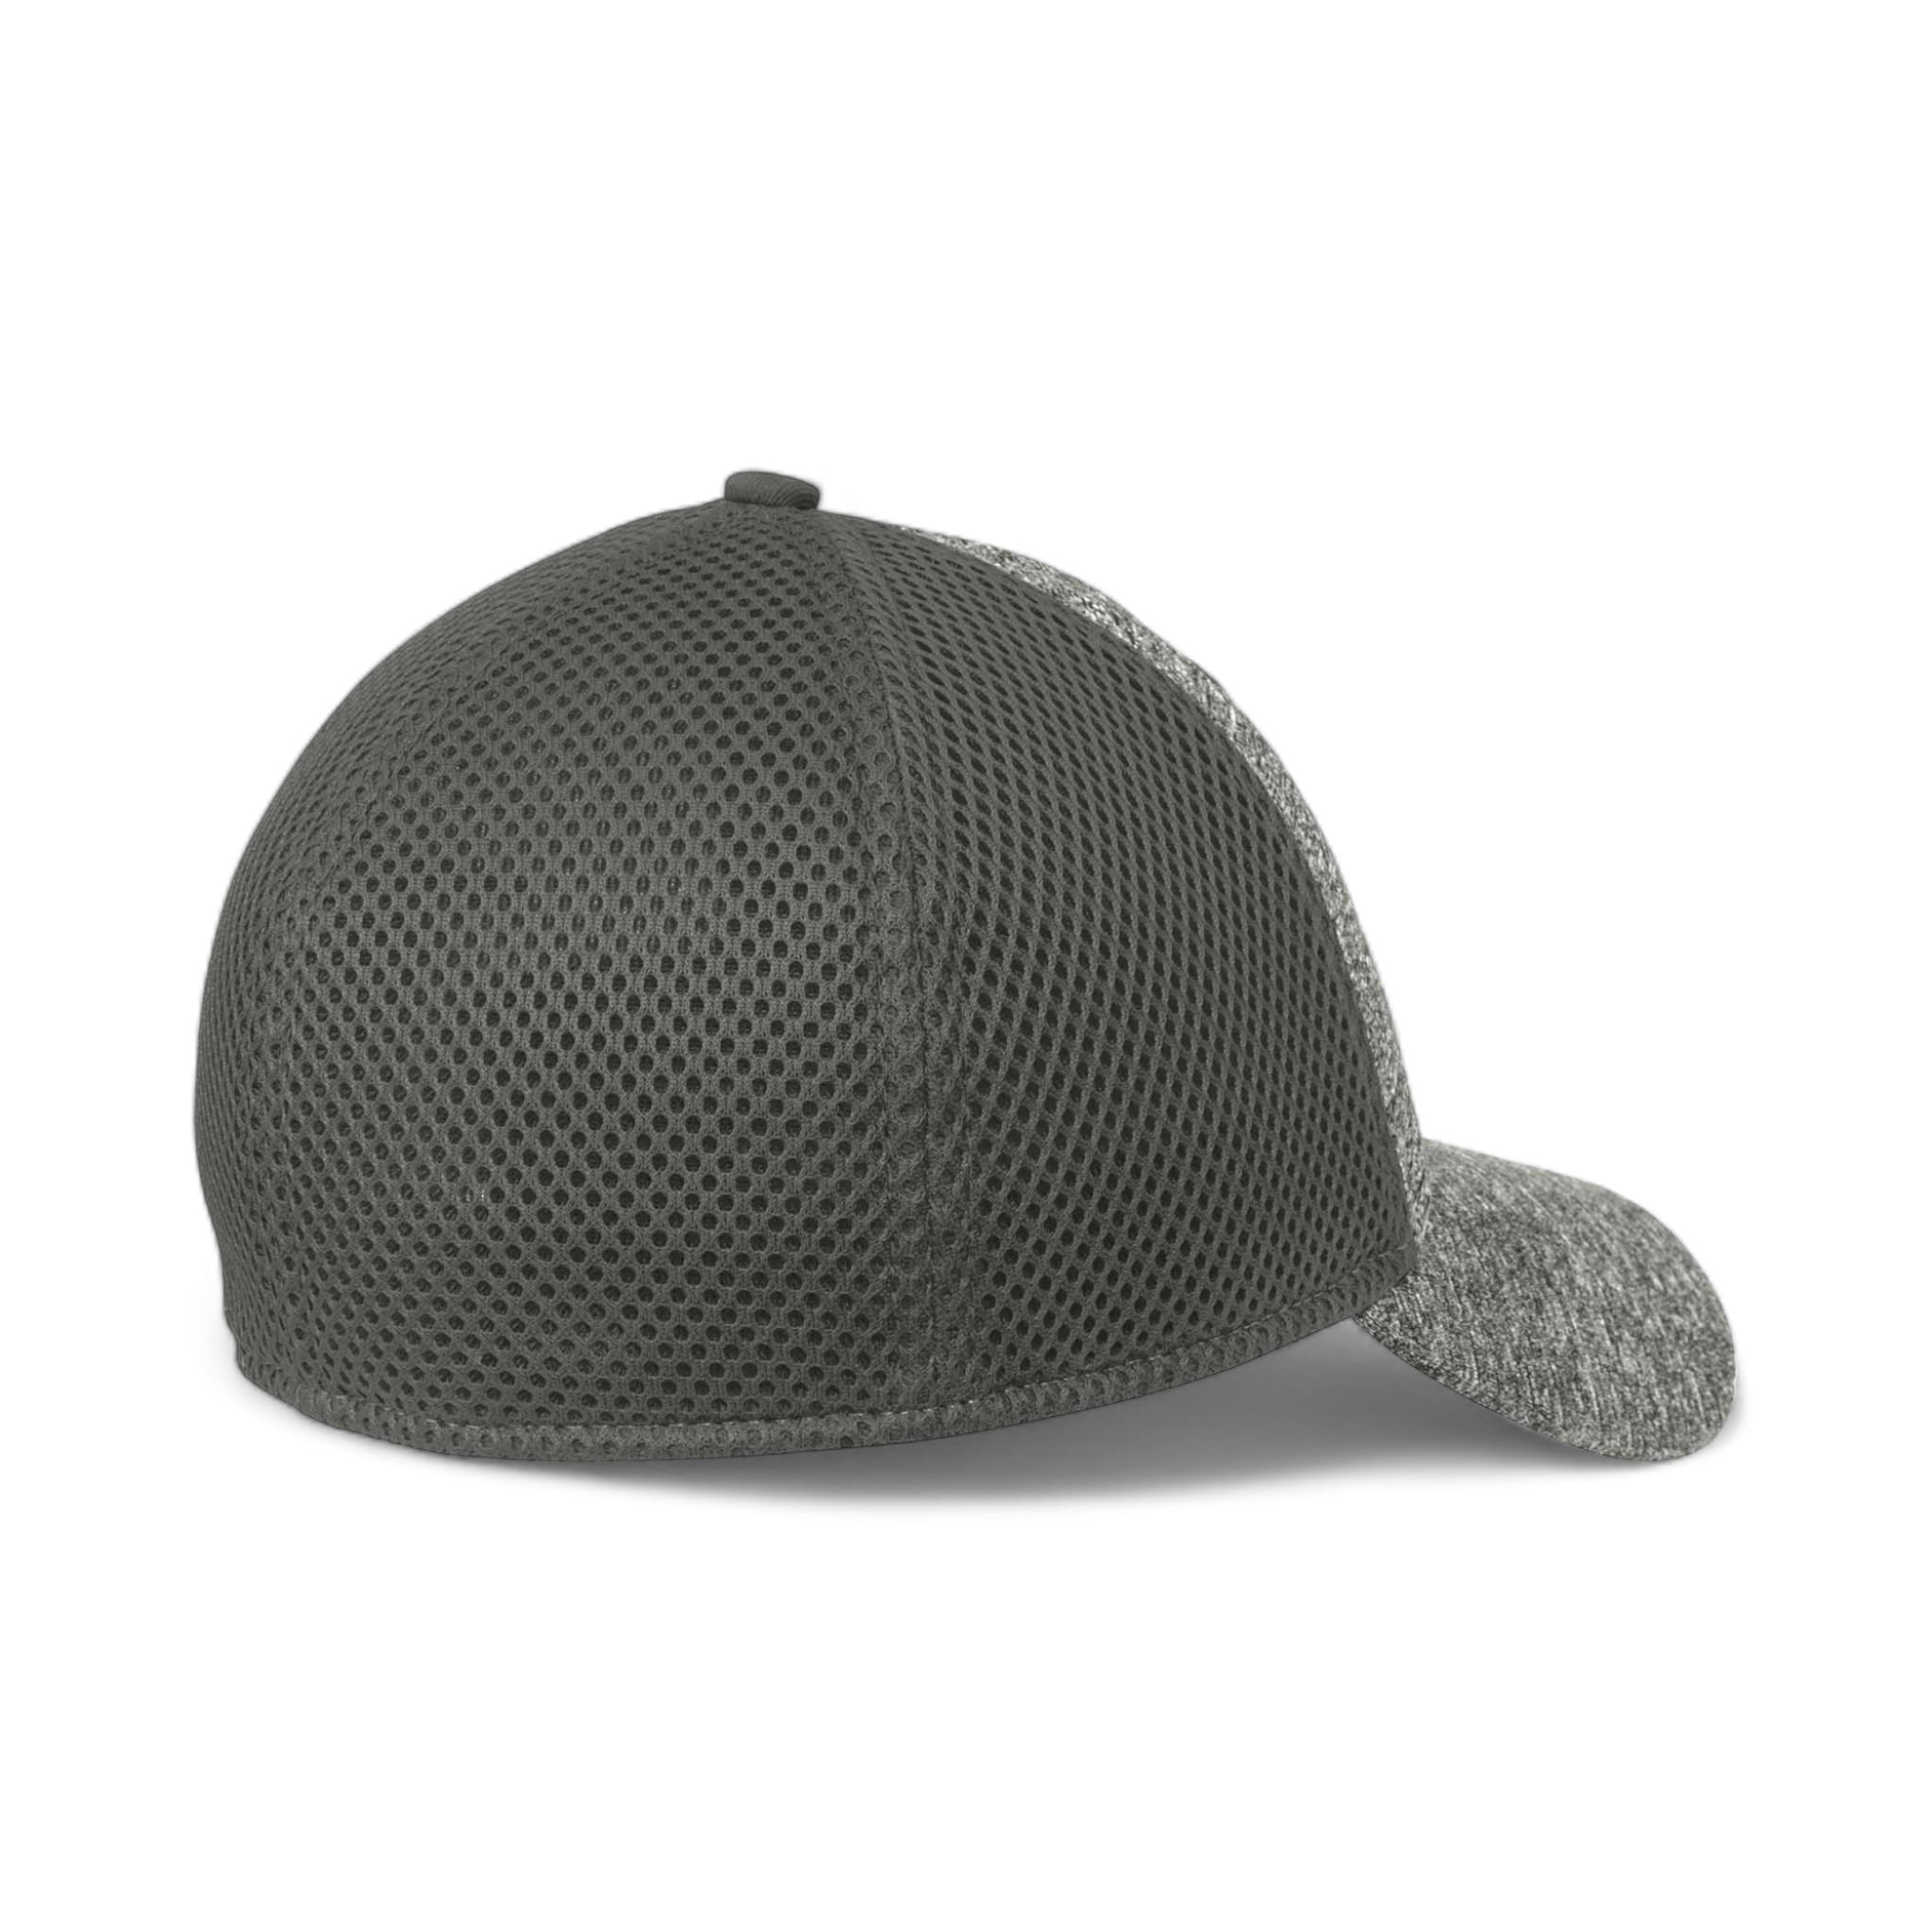 Back view of New Era NE702 custom hat in graphite and shadow heather